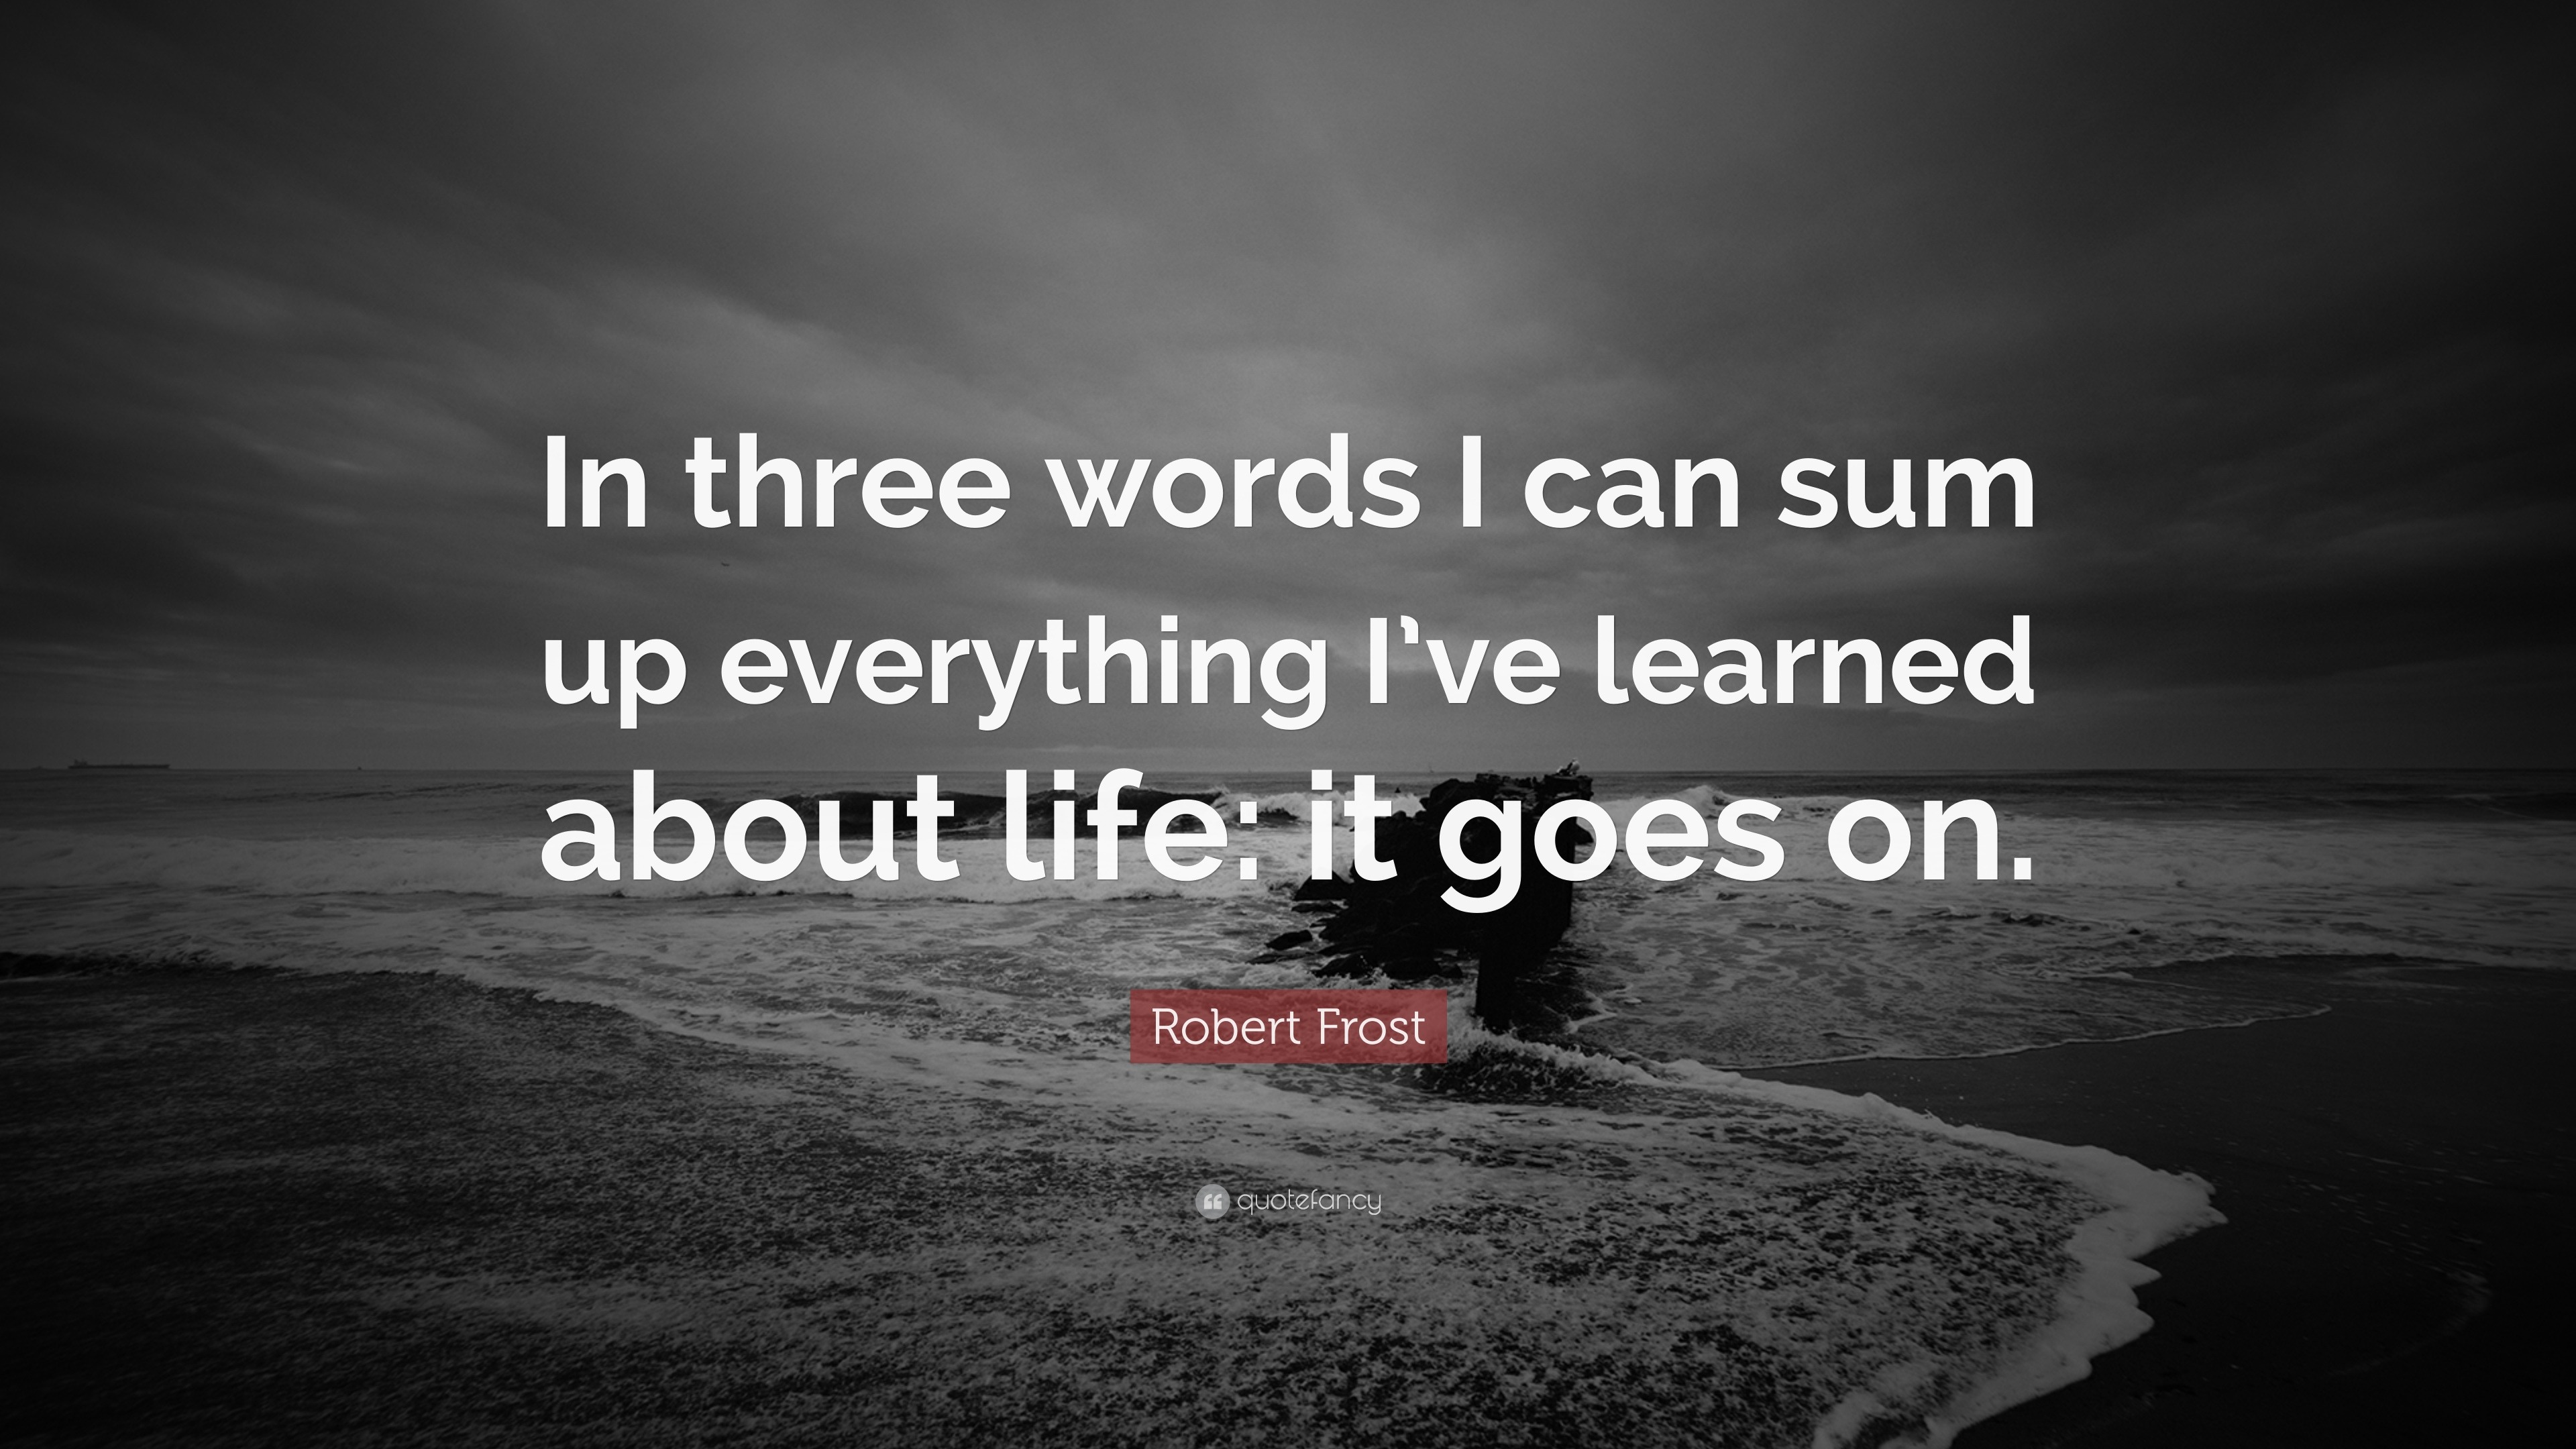 Robert Frost Quote “In three words I can sum up everything I’ve